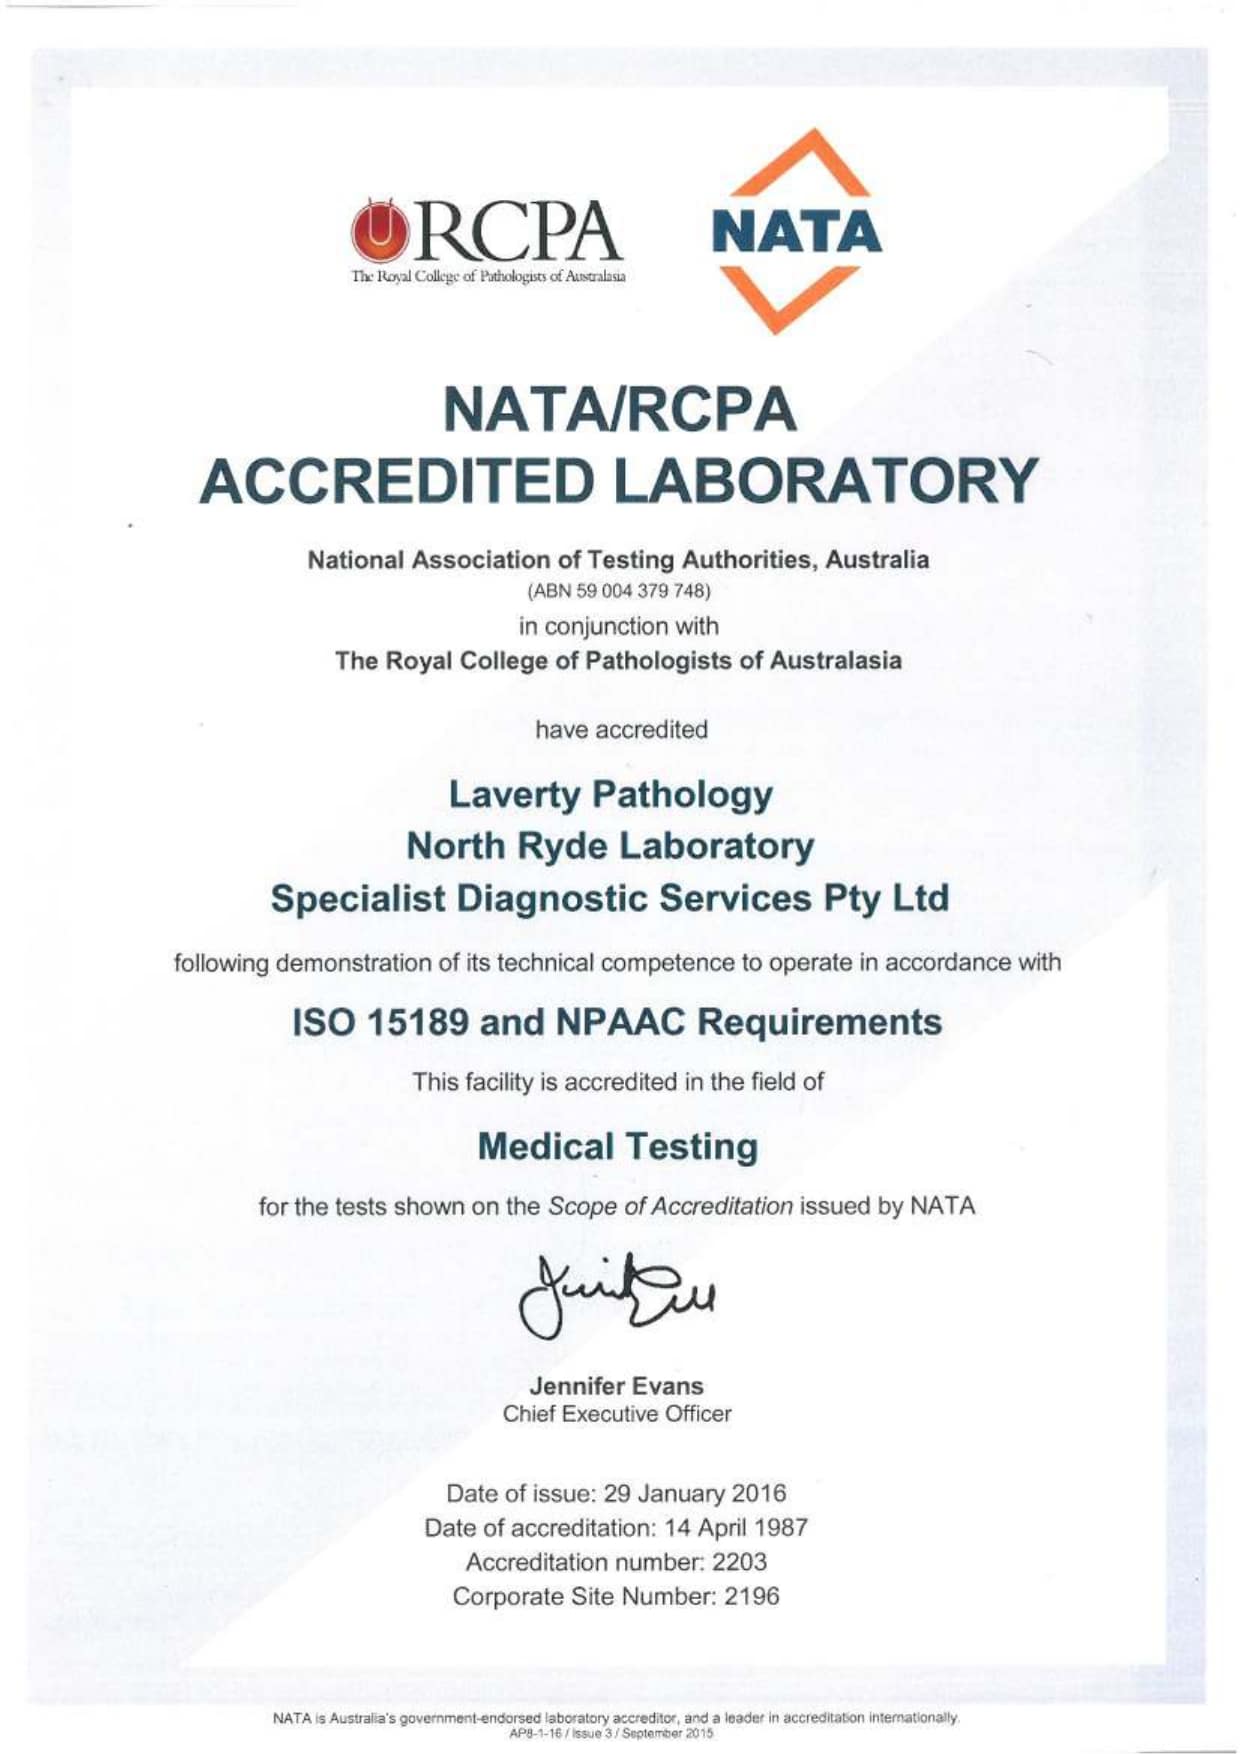 Cerba Research - Certification - Laverty Pathology ISO 151899 accreditation